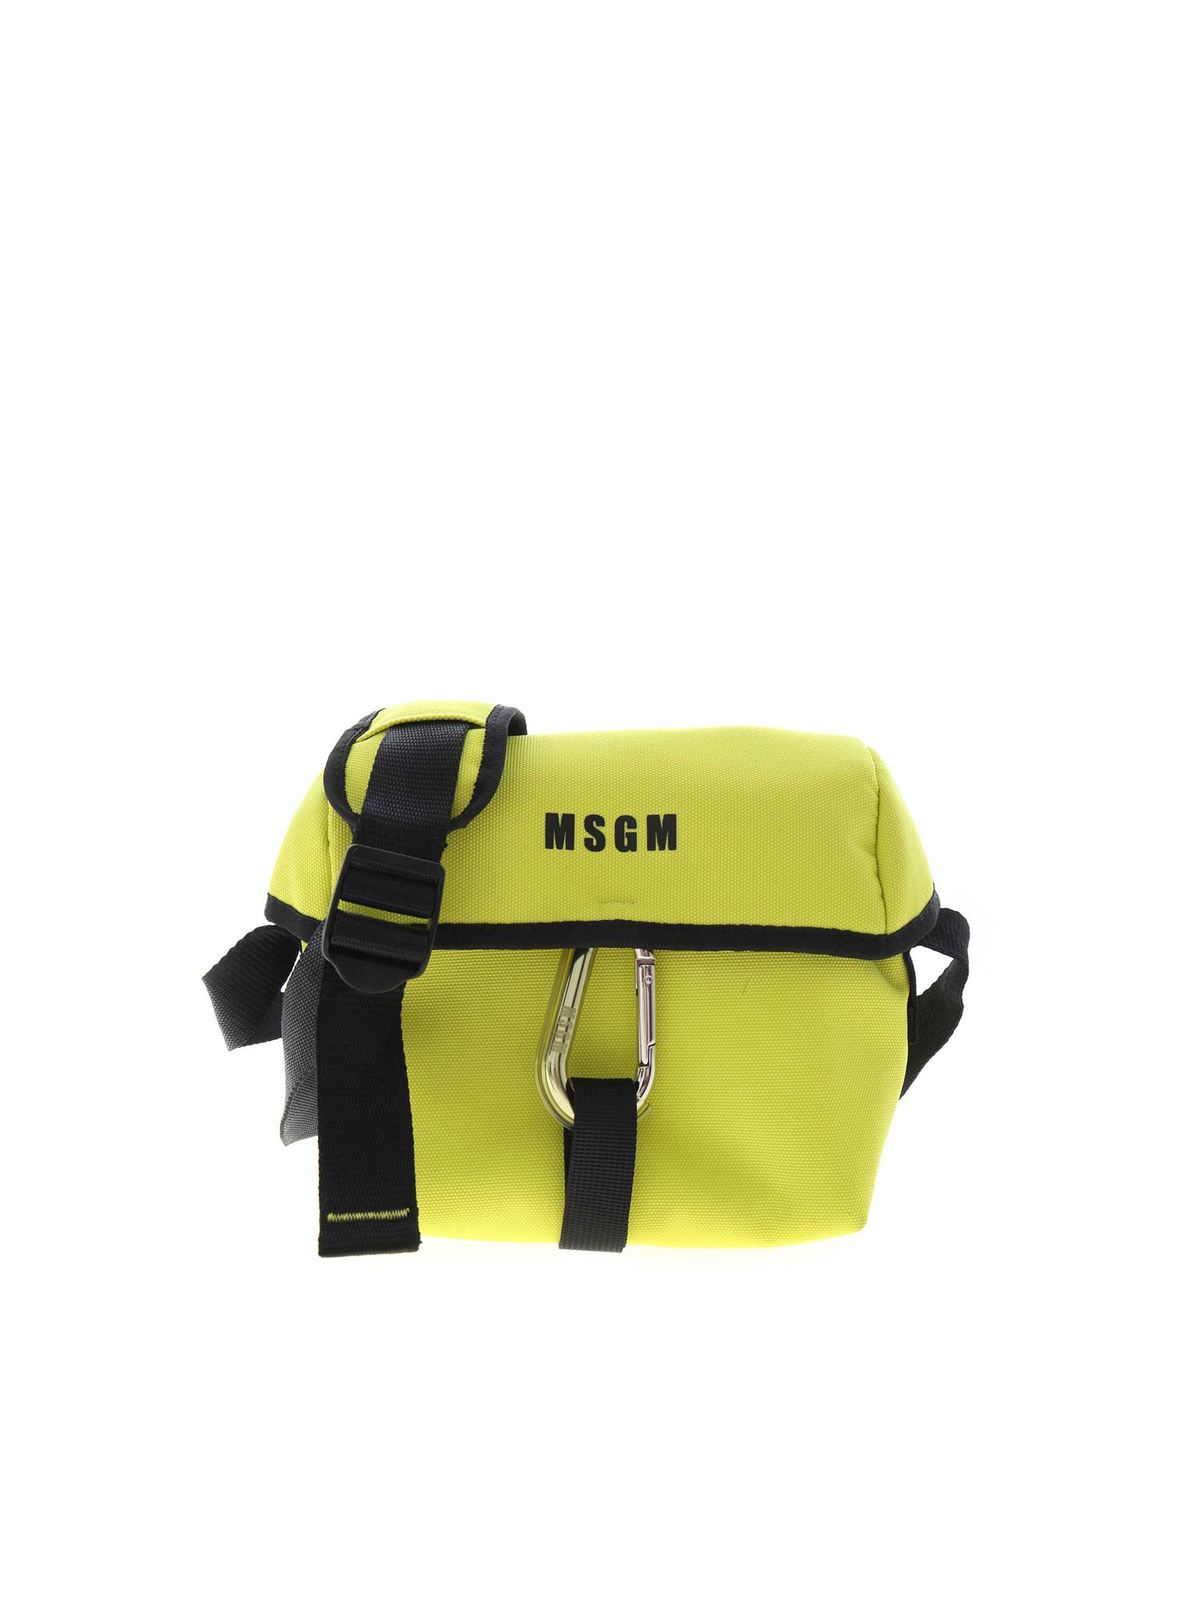 Cross body bags M.S.G.M. - MSGM shoulder bag in lime green color ...